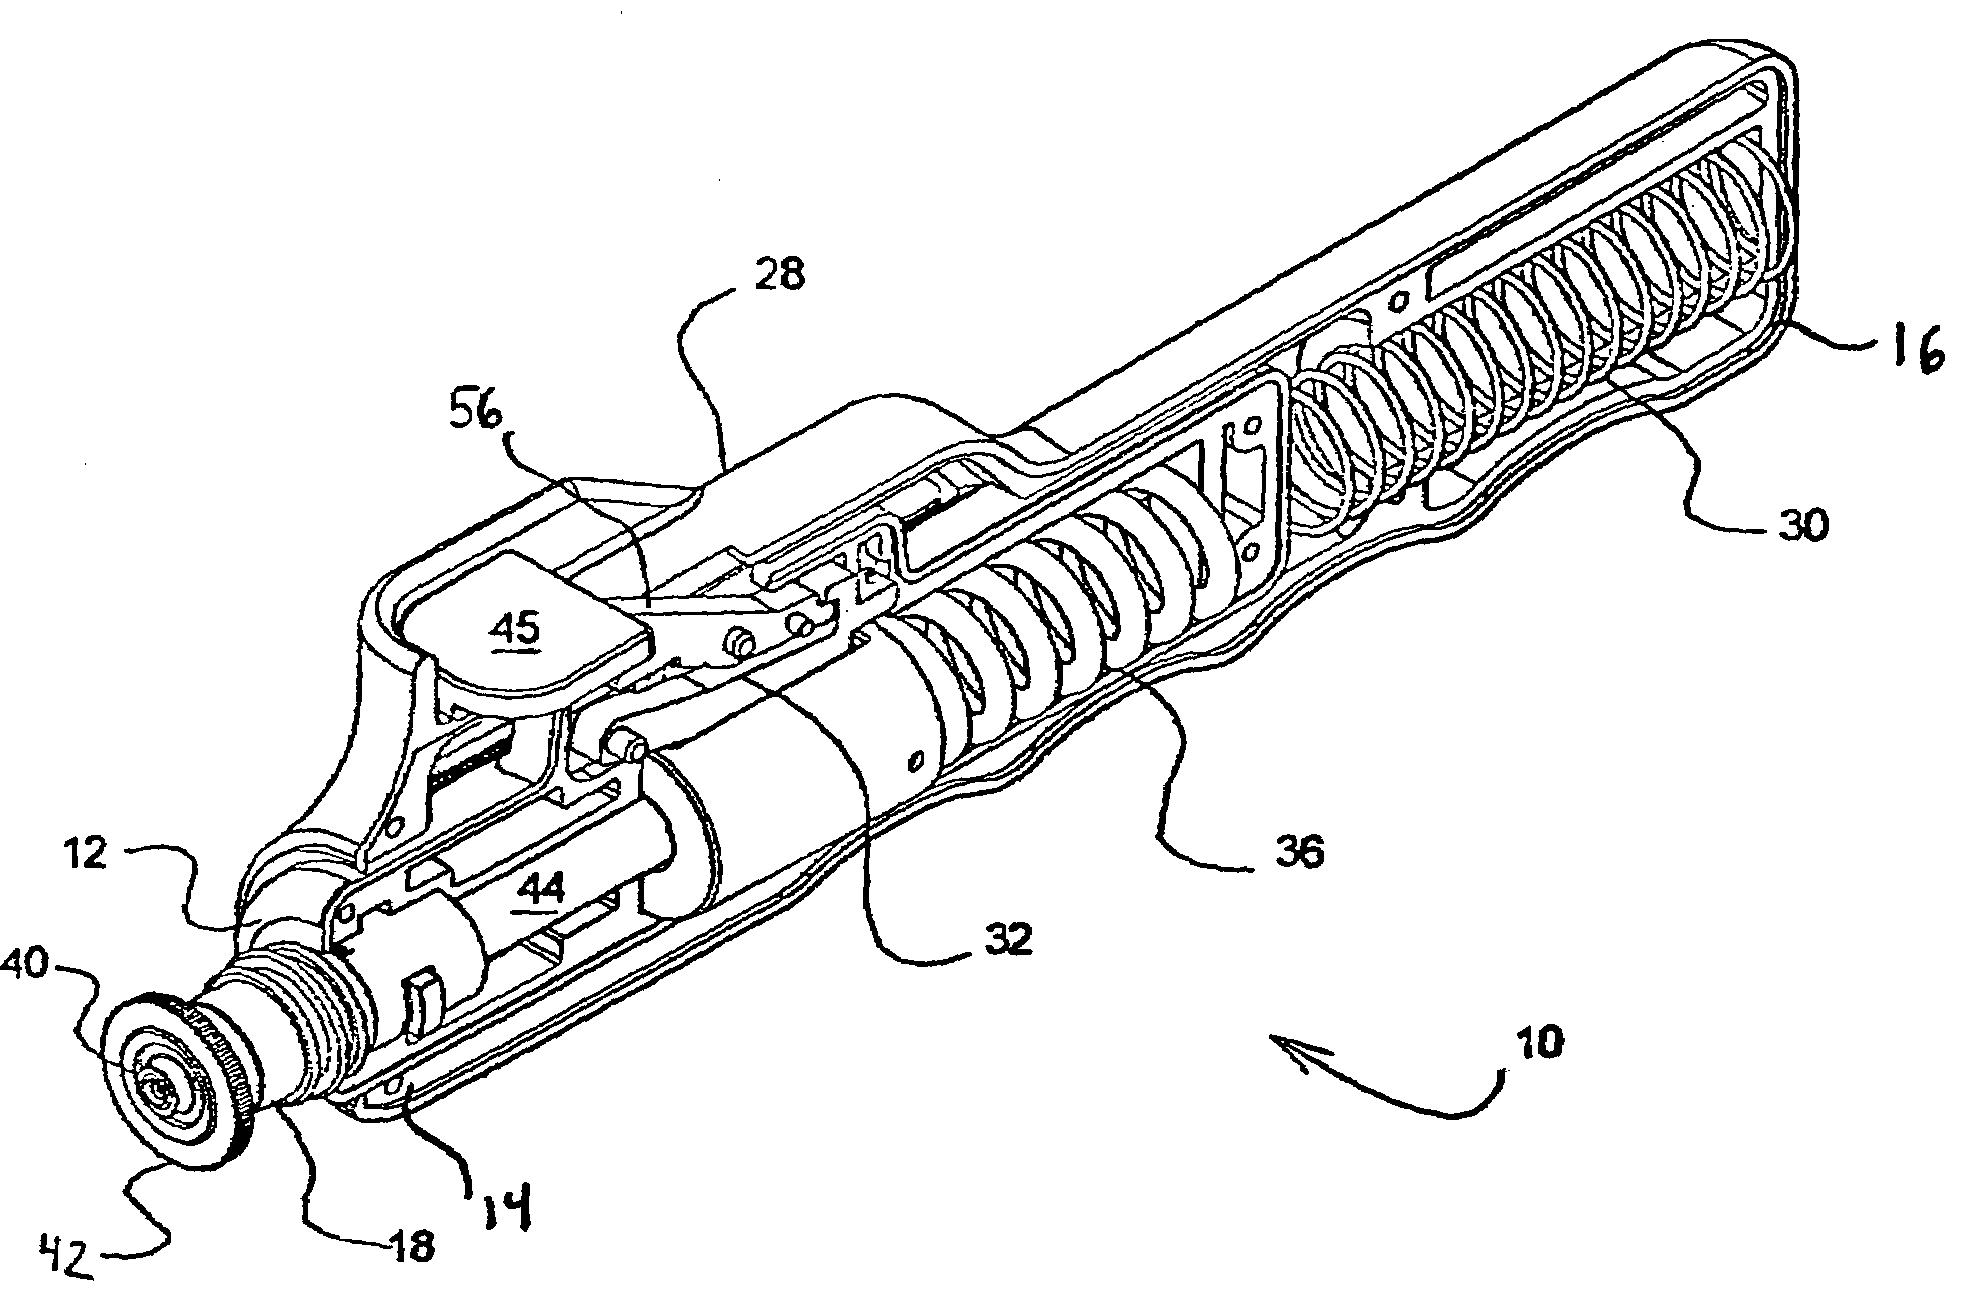 Needle-less injector and method of fluid delivery